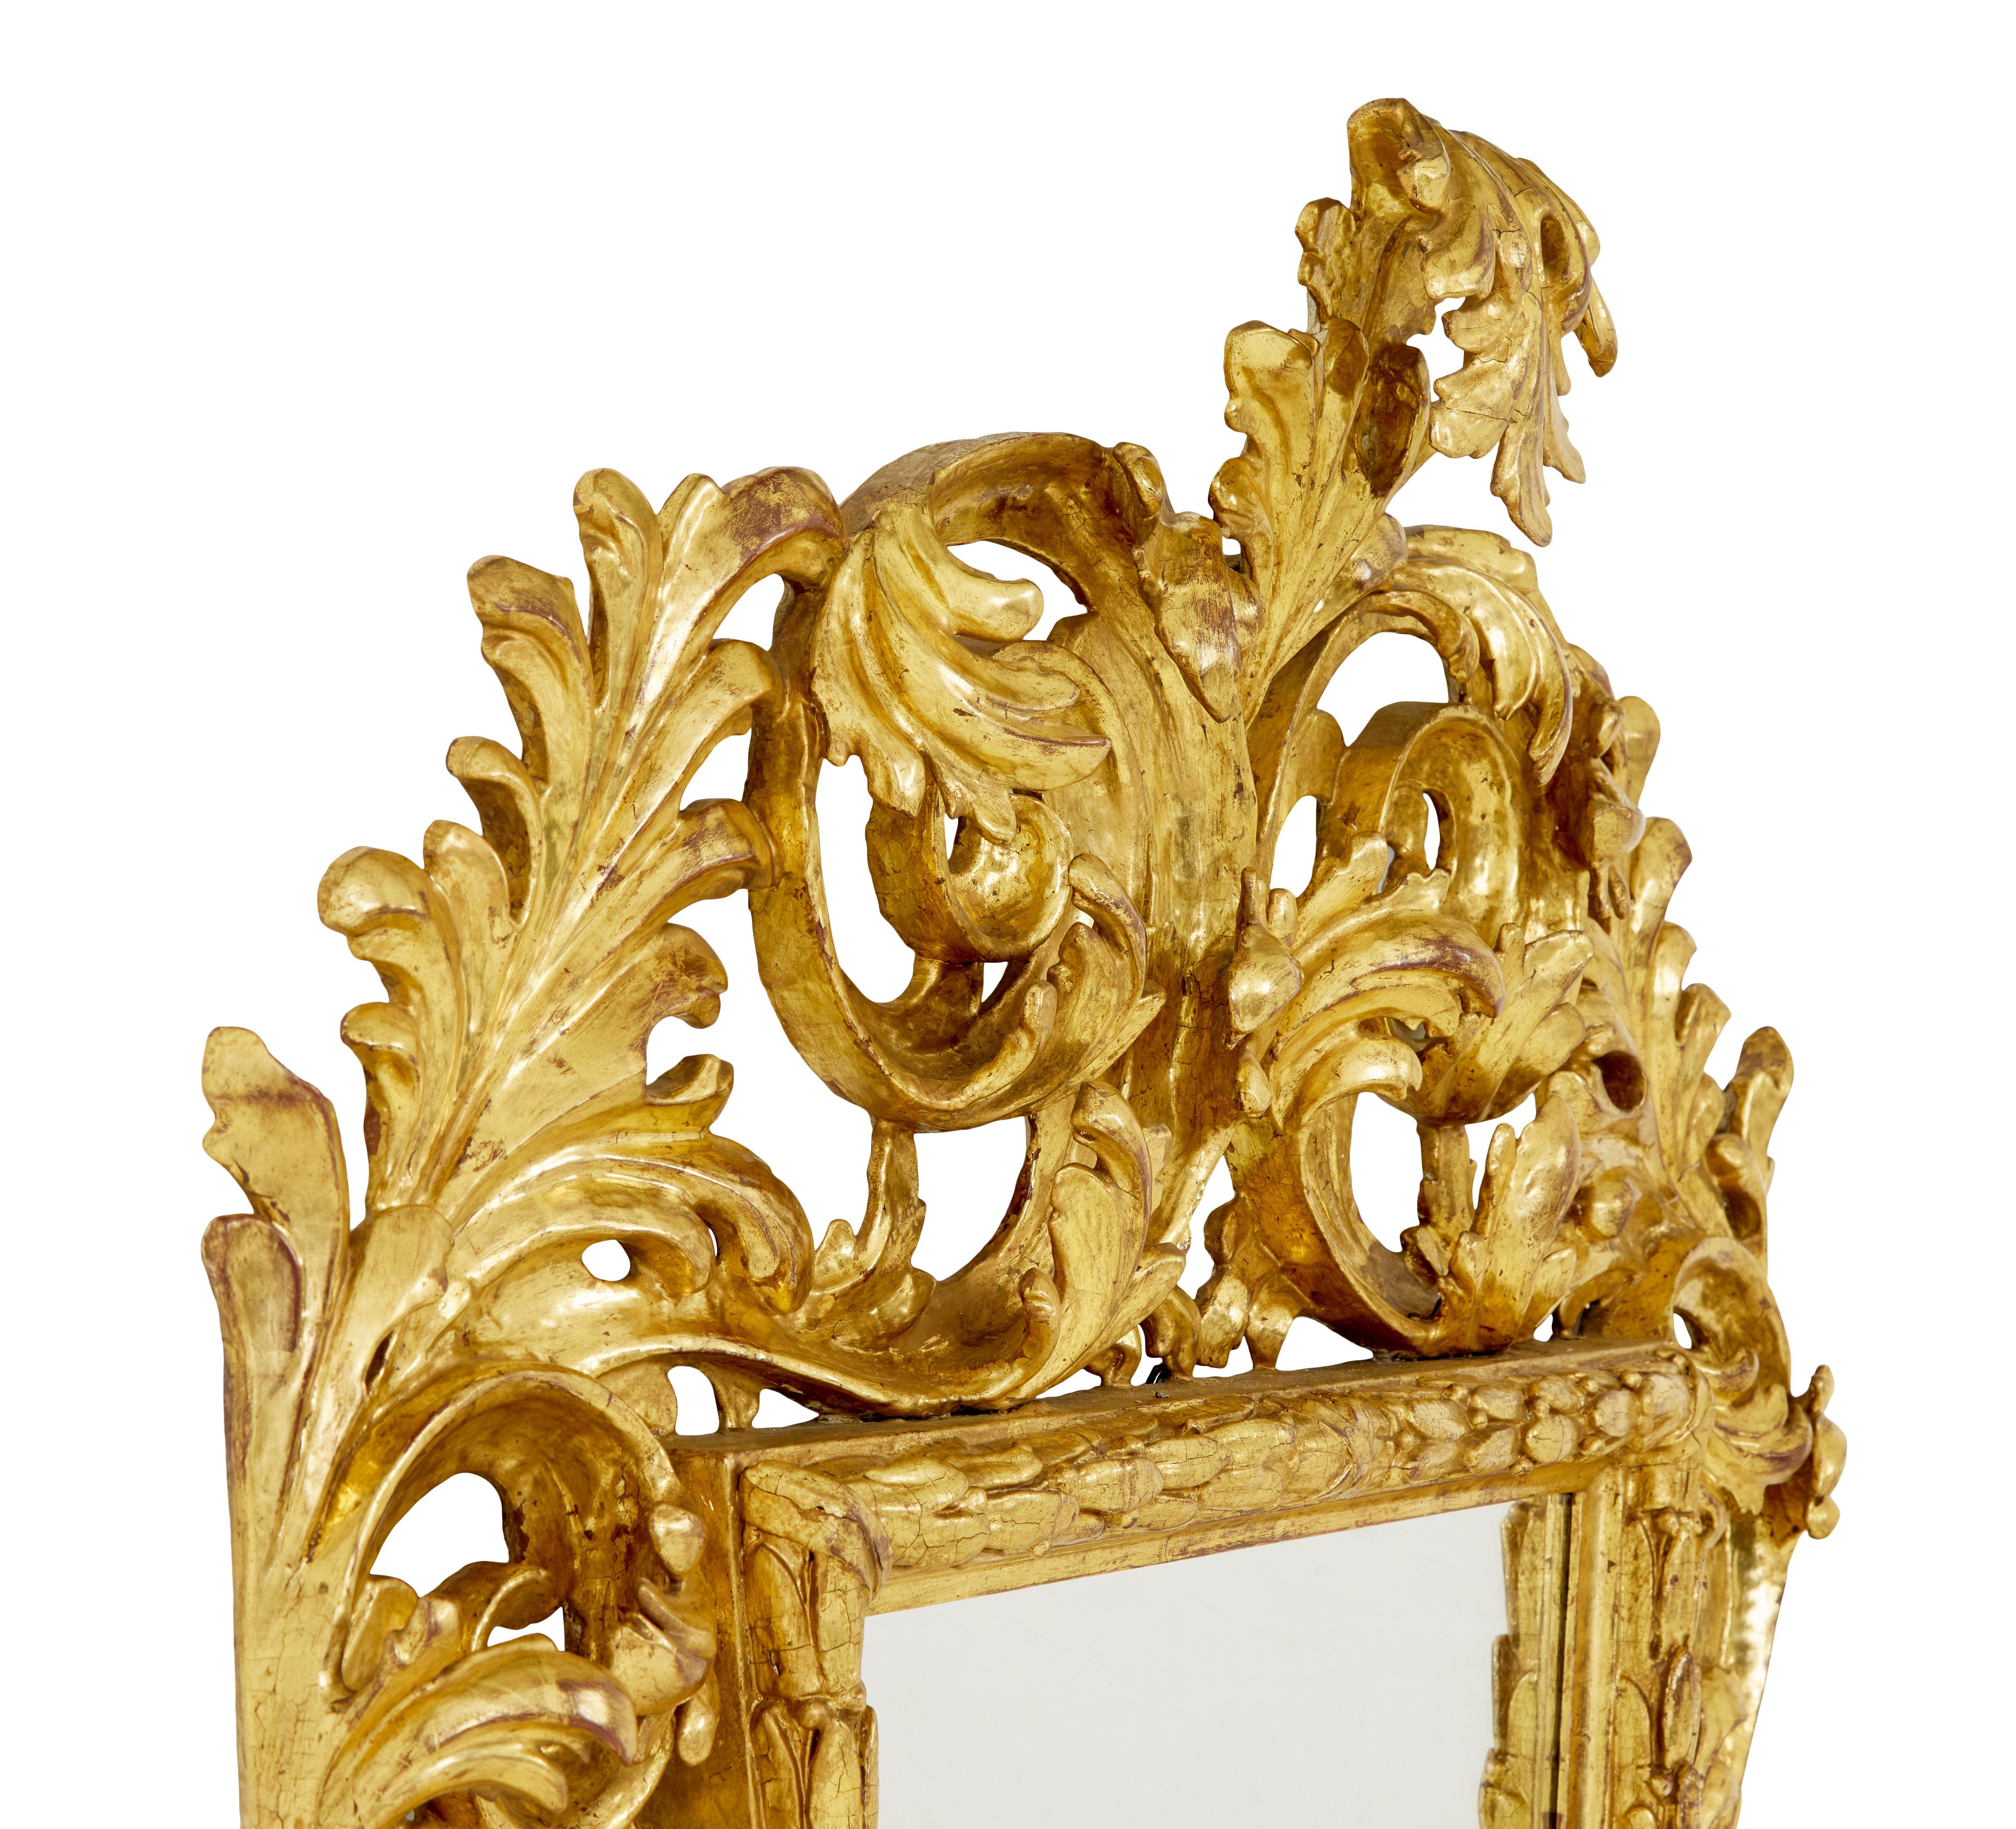 Carved 18th century carved Italian rococo giltwood mirror For Sale